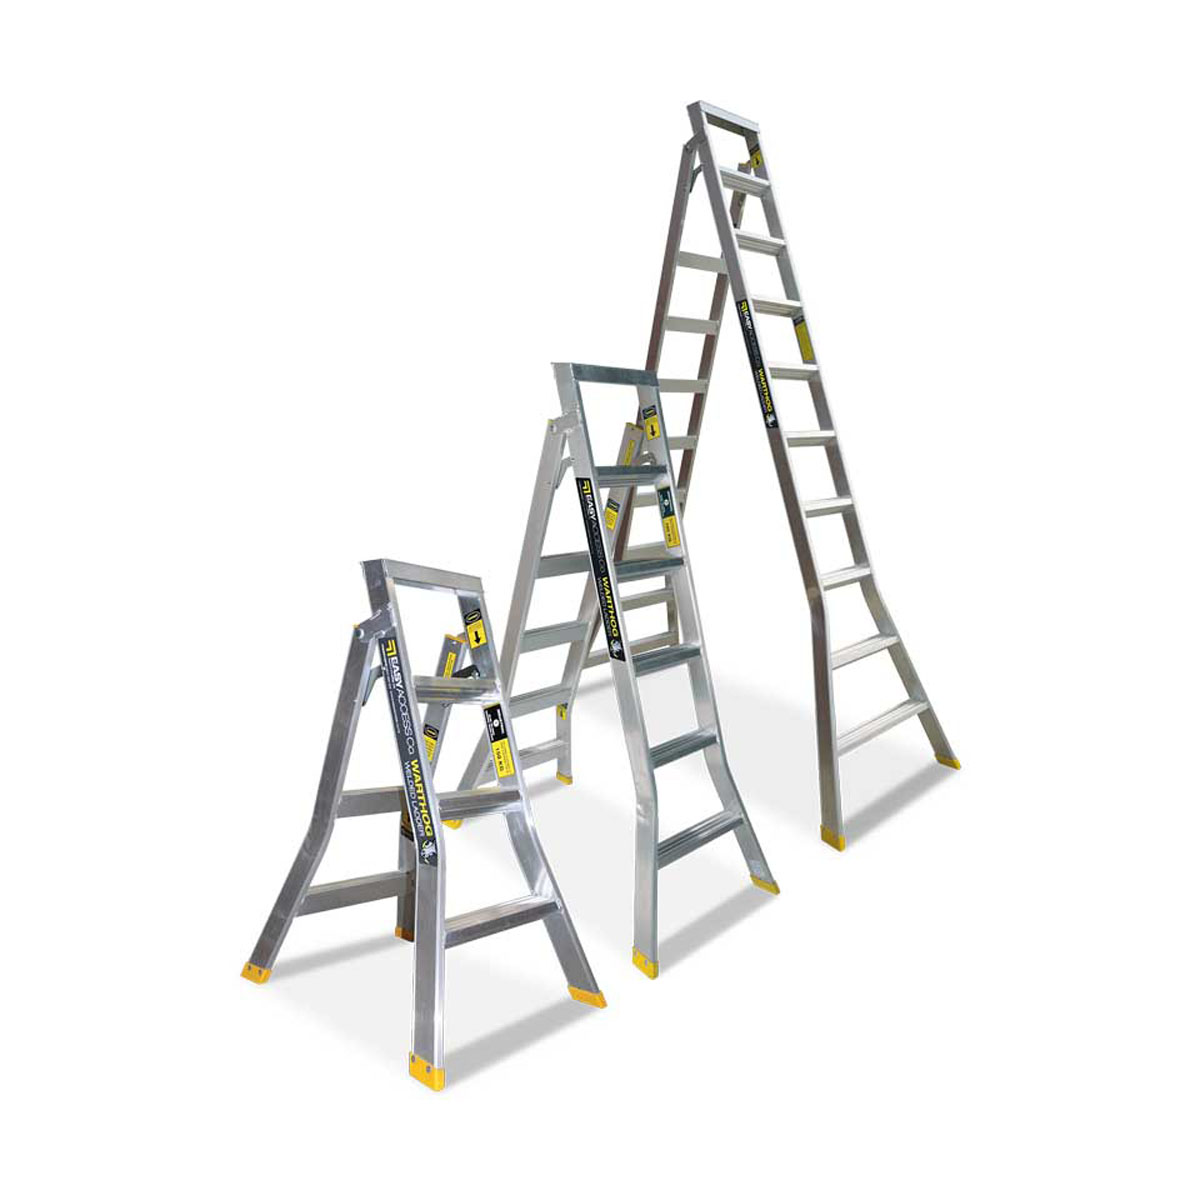 Buy Step-Extension Ladders - Heavy-Duty  in Step Ladders from Warthog available at Astrolift NZ